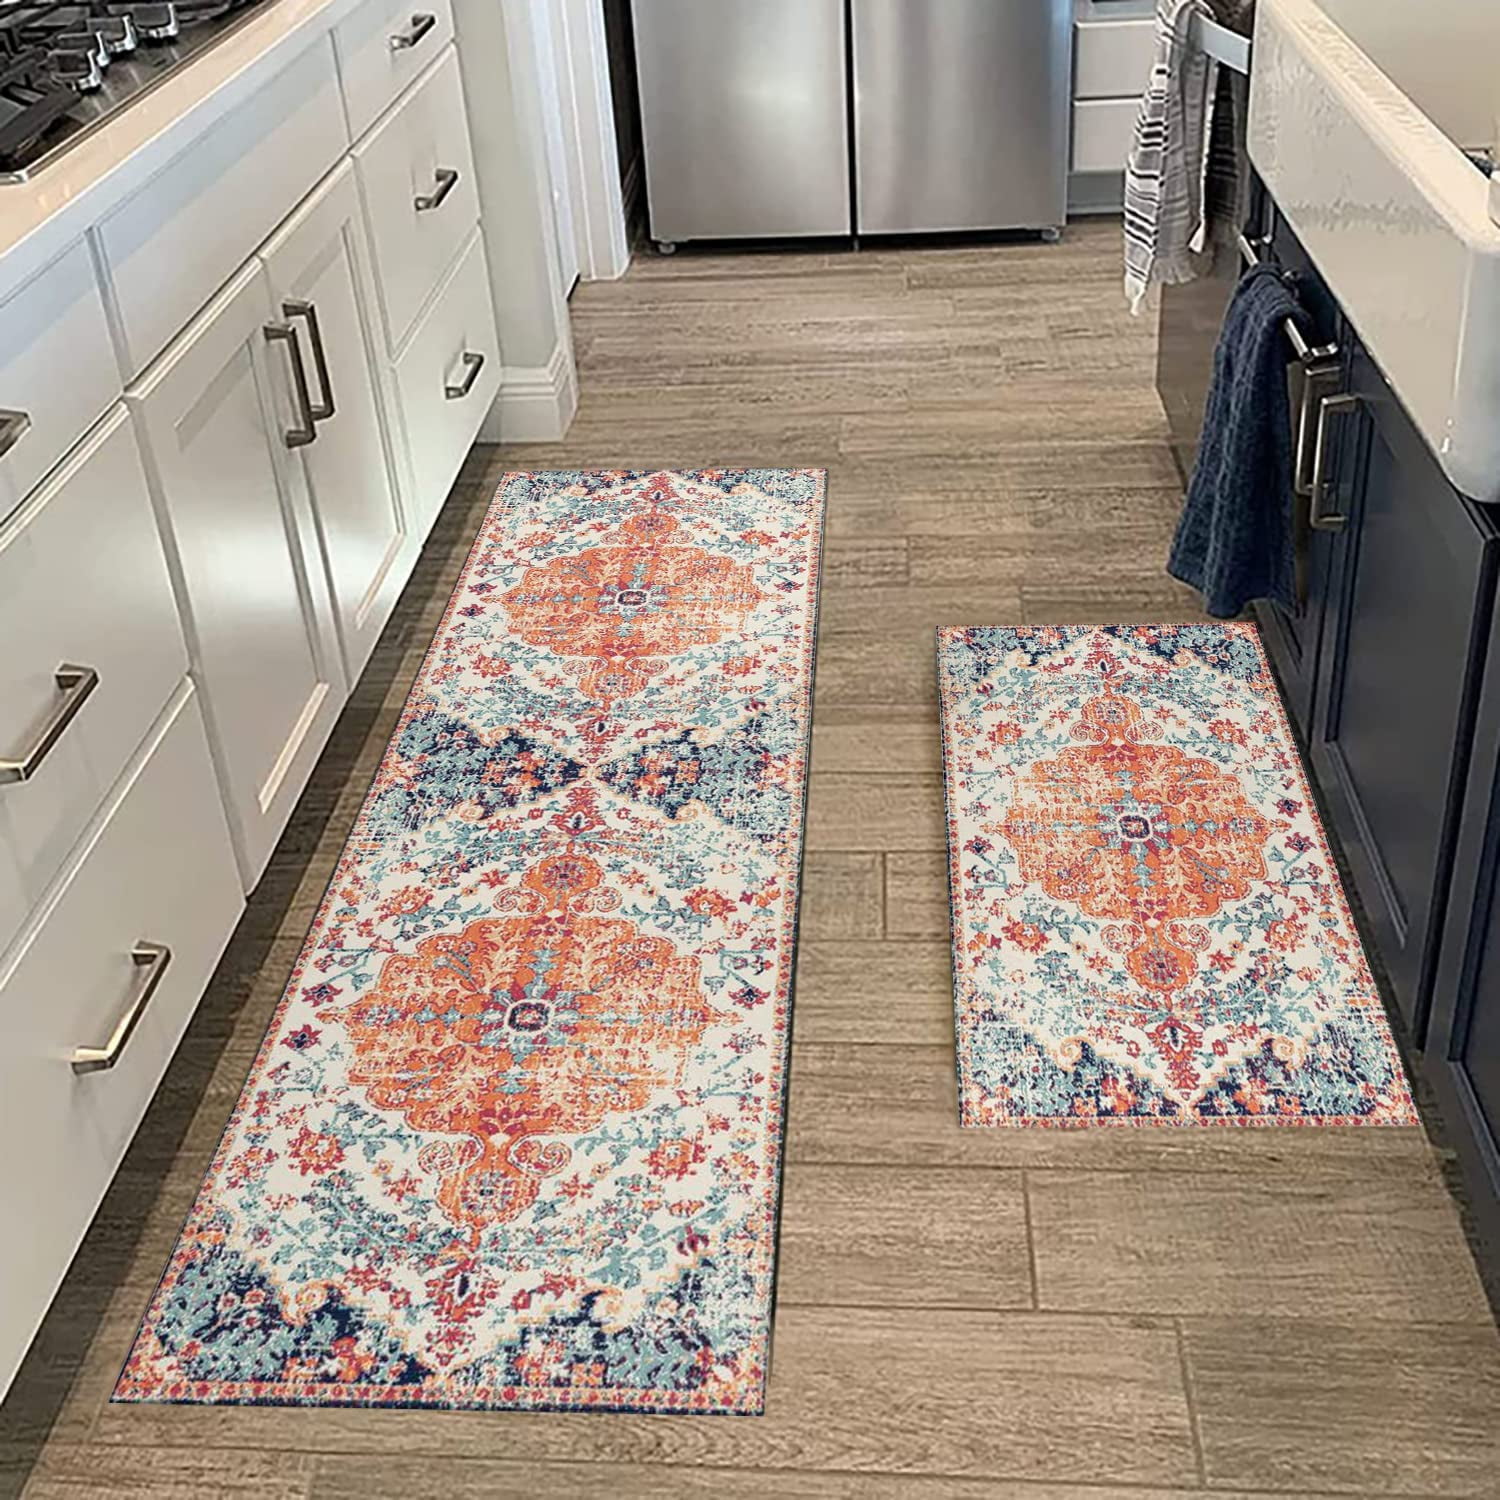 LUFEIJIASHI Kitchen Rugs and Mats Non Skid Washable Set of 2 PCS Absorbent  Kitchen Runner Rugs Farmhouse Kitchen Floor Mats for in Front of Sink